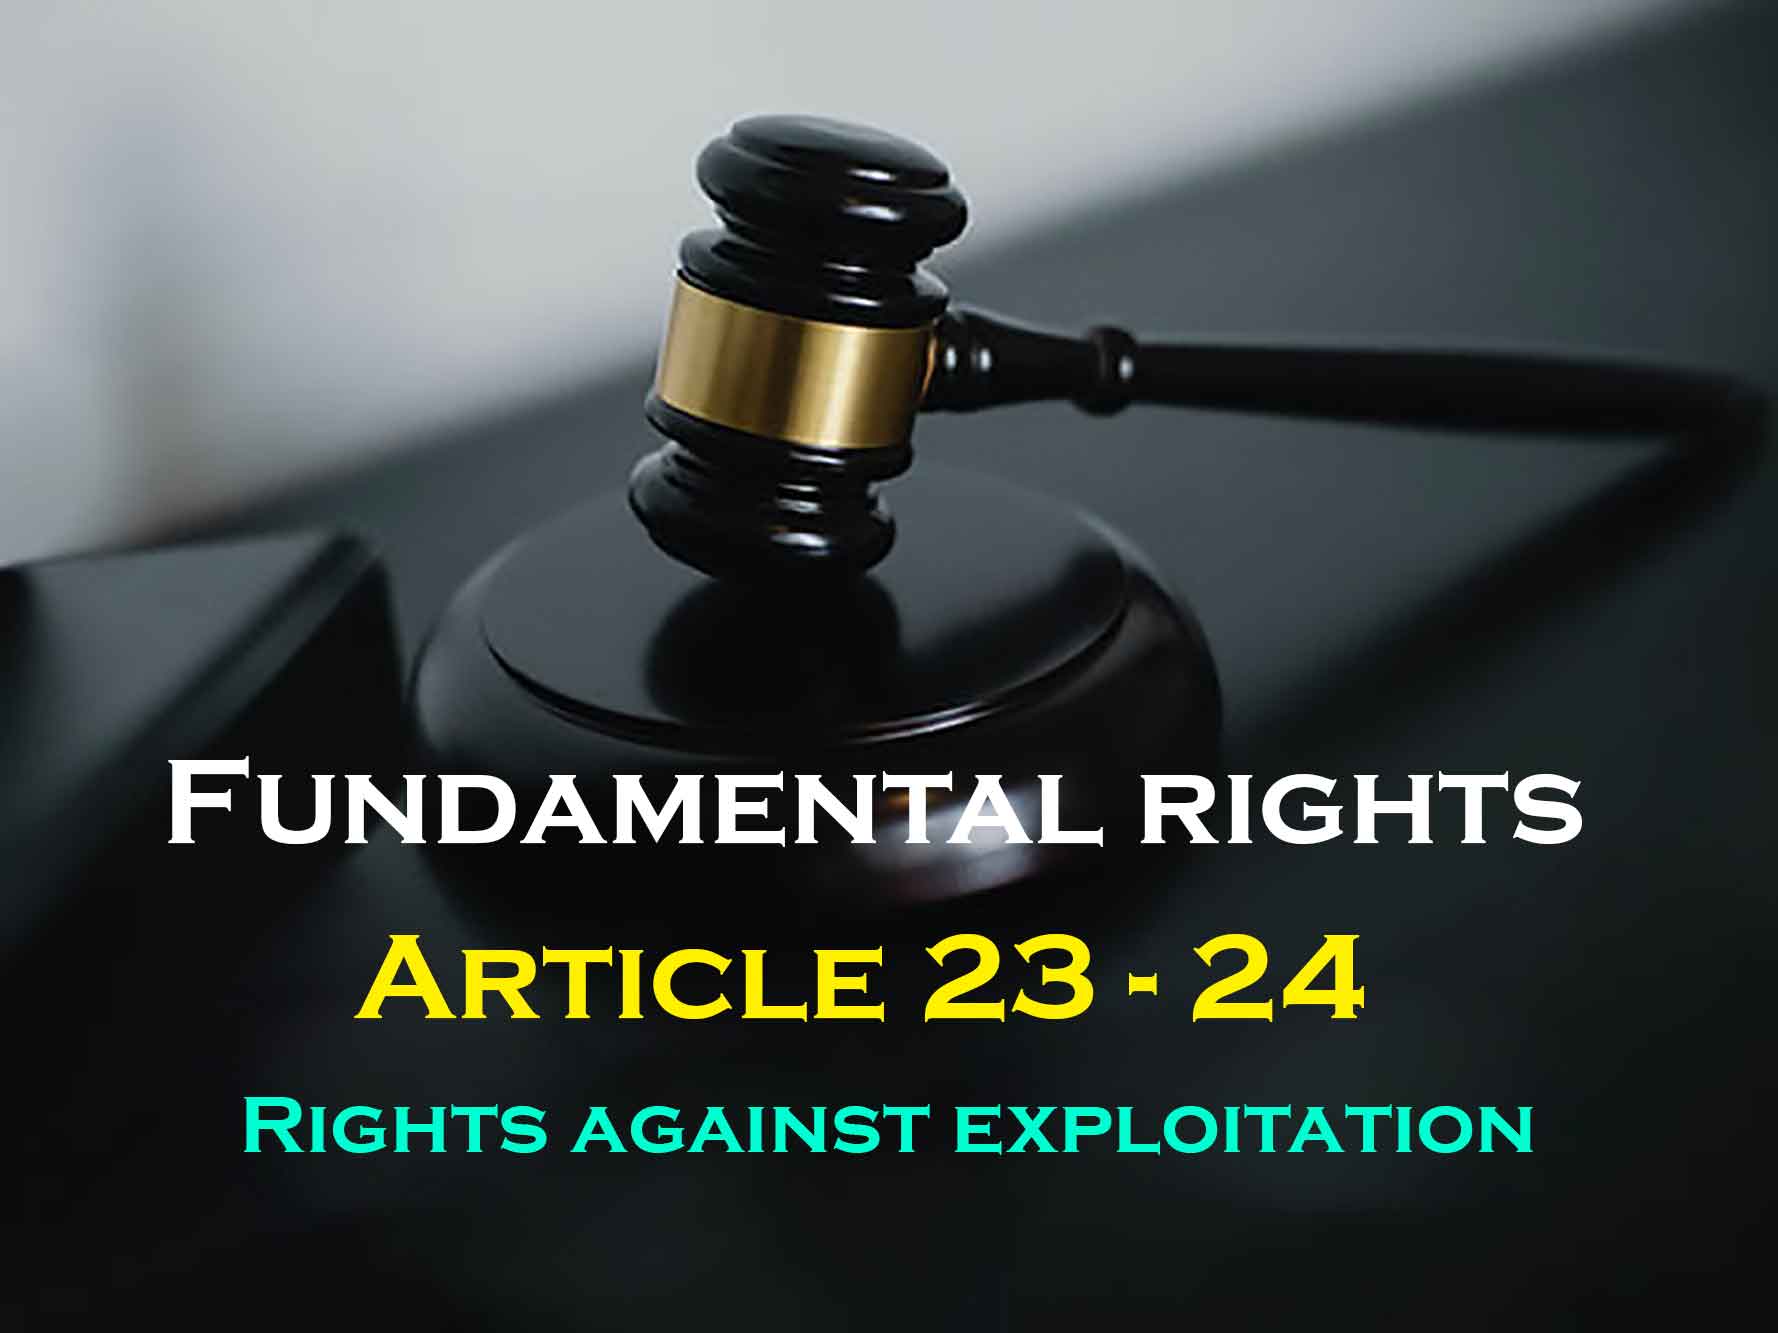 Article (23-24) Rights Against Exploitation